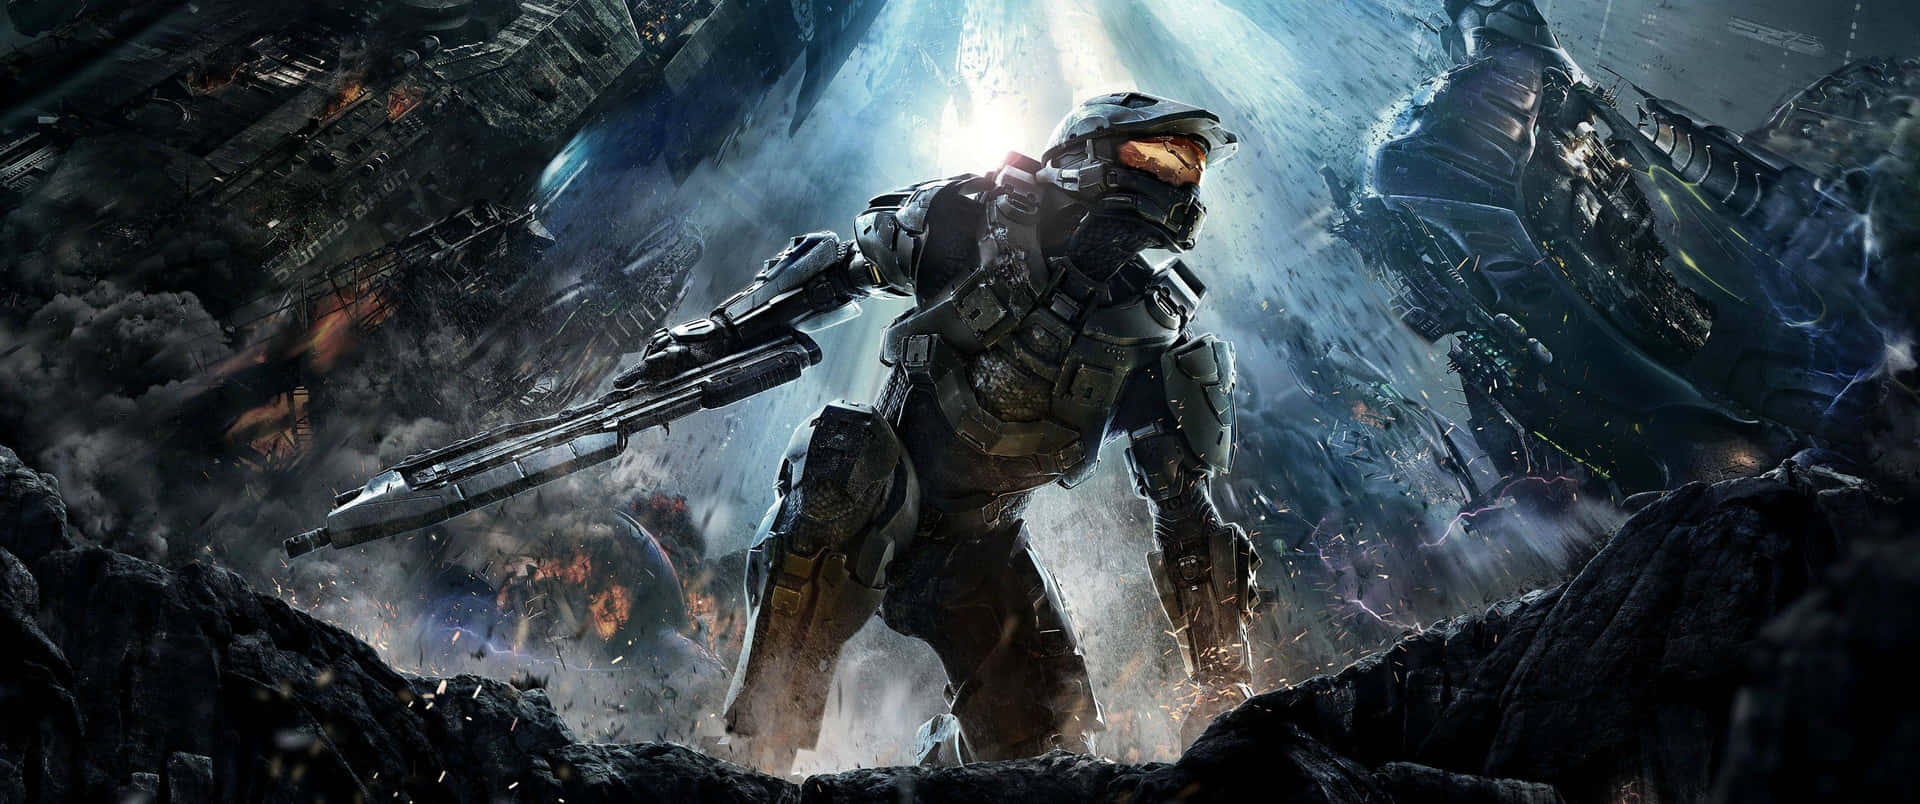 3440x1440 Game Halo 4